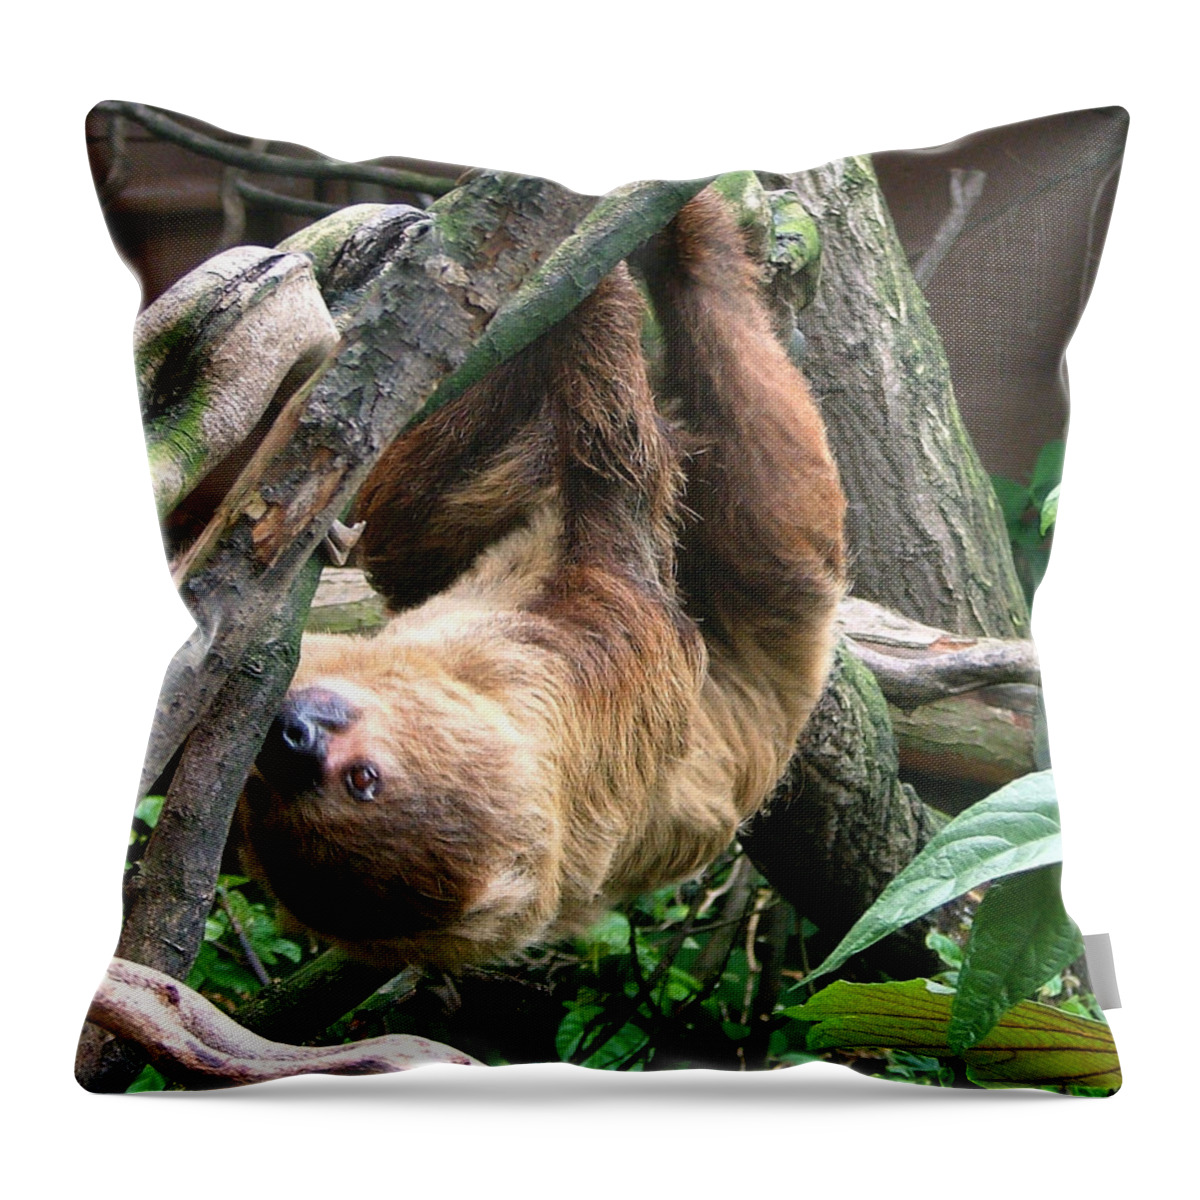 Photograph Throw Pillow featuring the photograph Tree Sloth by Heather Lennox